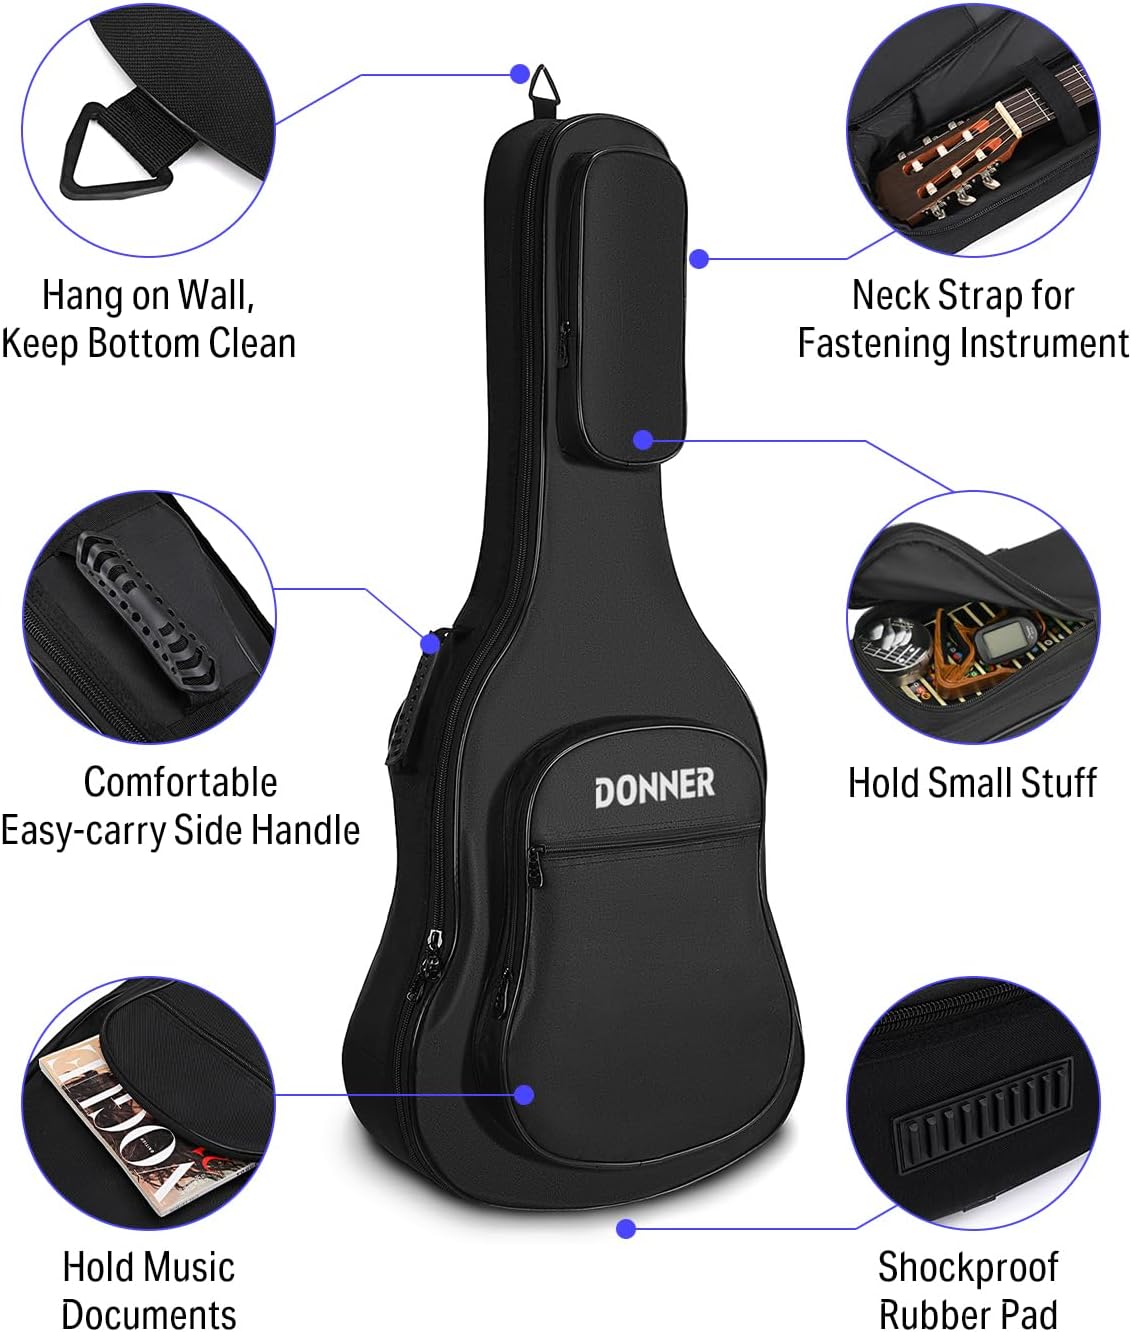 Donner 36 Inch Acoustic Guitar Case, 0.4 Inch Thick Padding Sponge 600D Ripstop Waterproof Nylon Soft Guitar Gig Bag with 3 Pockets and Back Hanger Loop, Black Acoustic bag 36 inch-10mm Thick